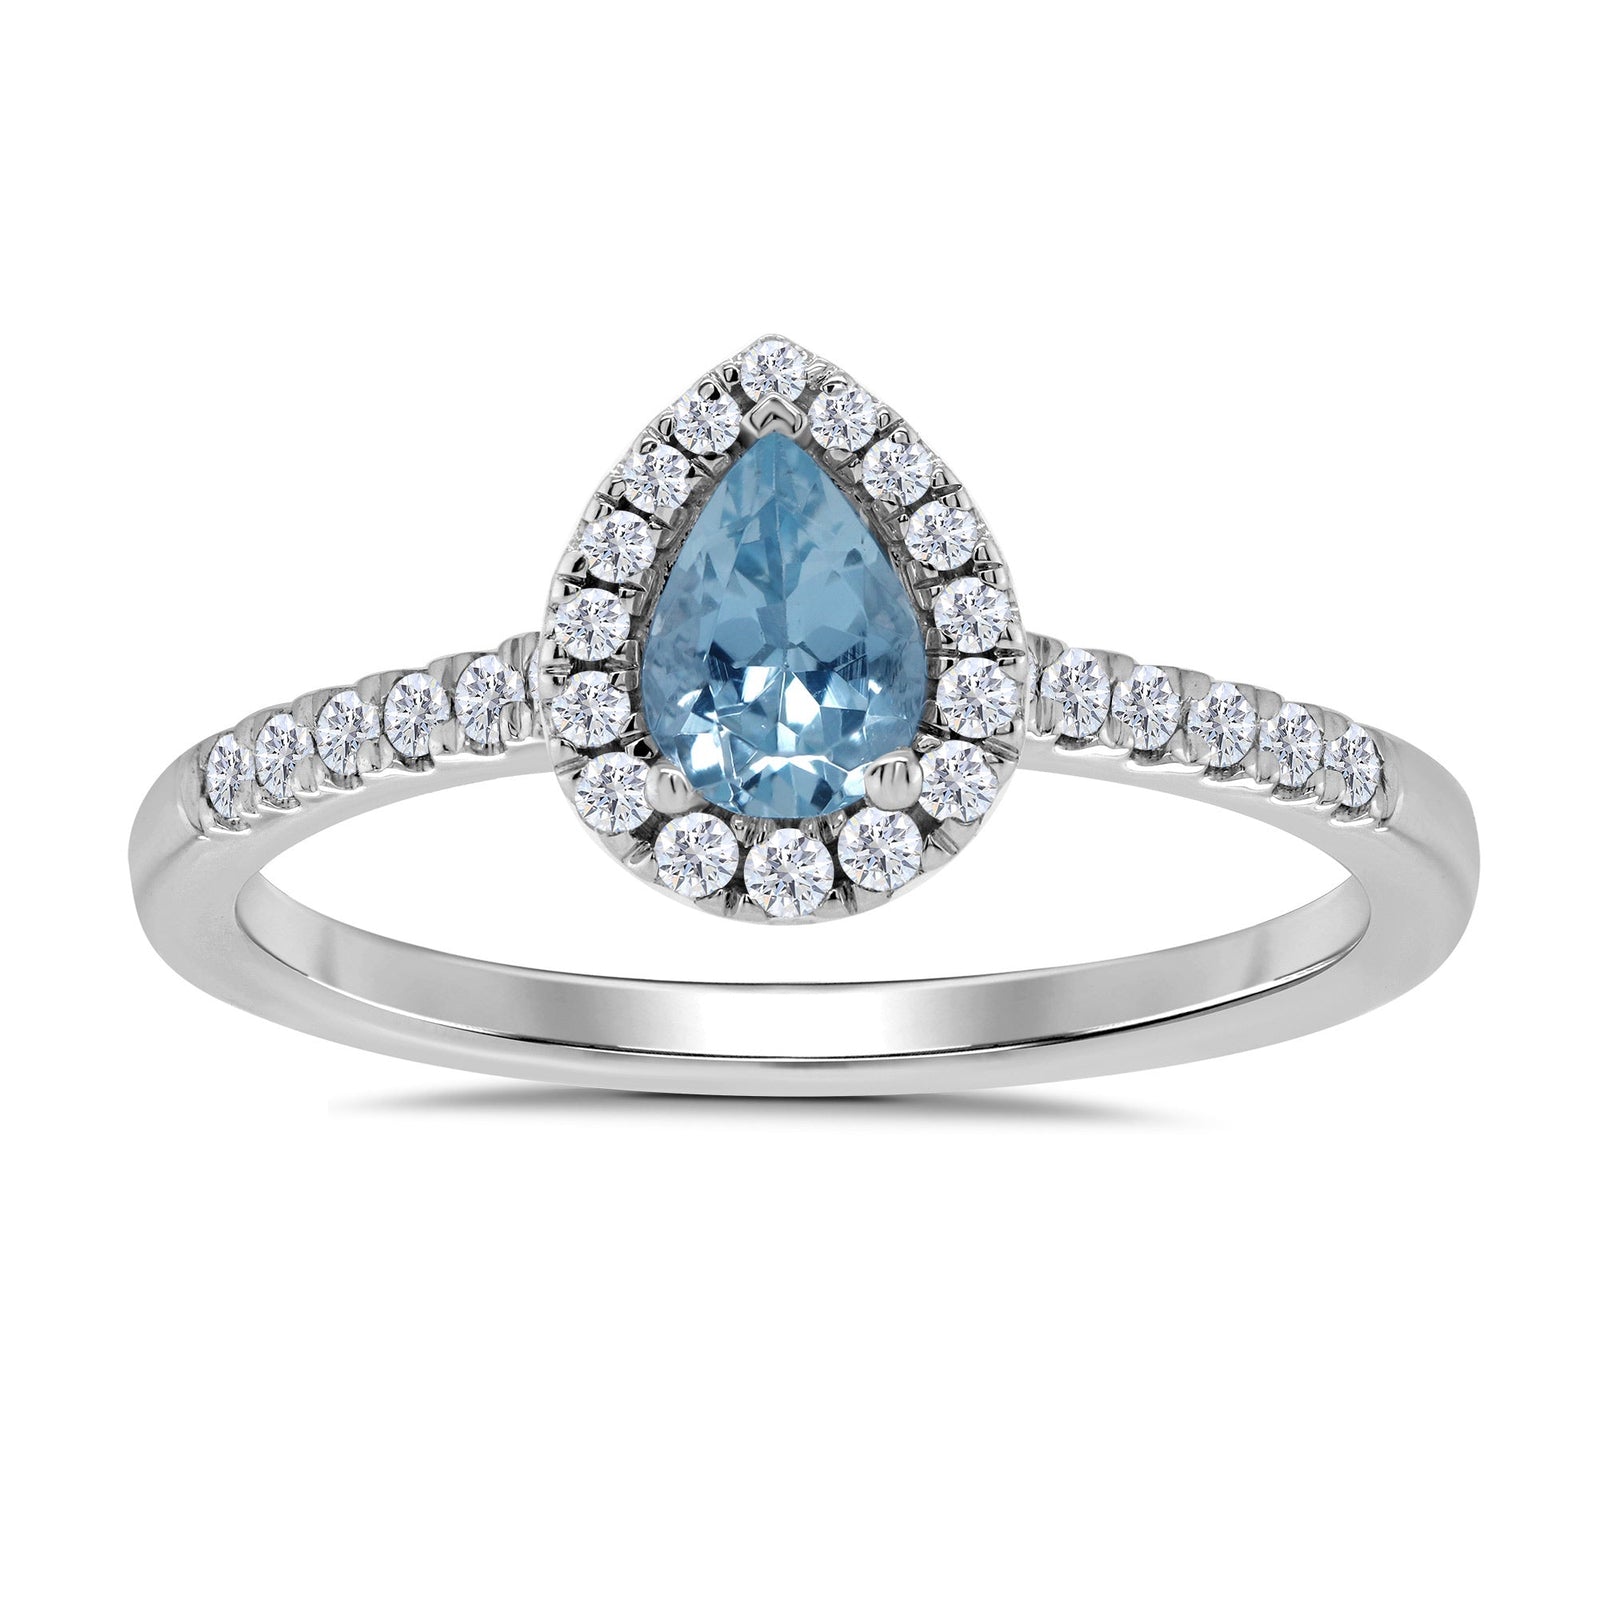 9ct white gold 6x4mm pear shape aquamarine & diamond cluster ring with diamond shoulders 0.20ct